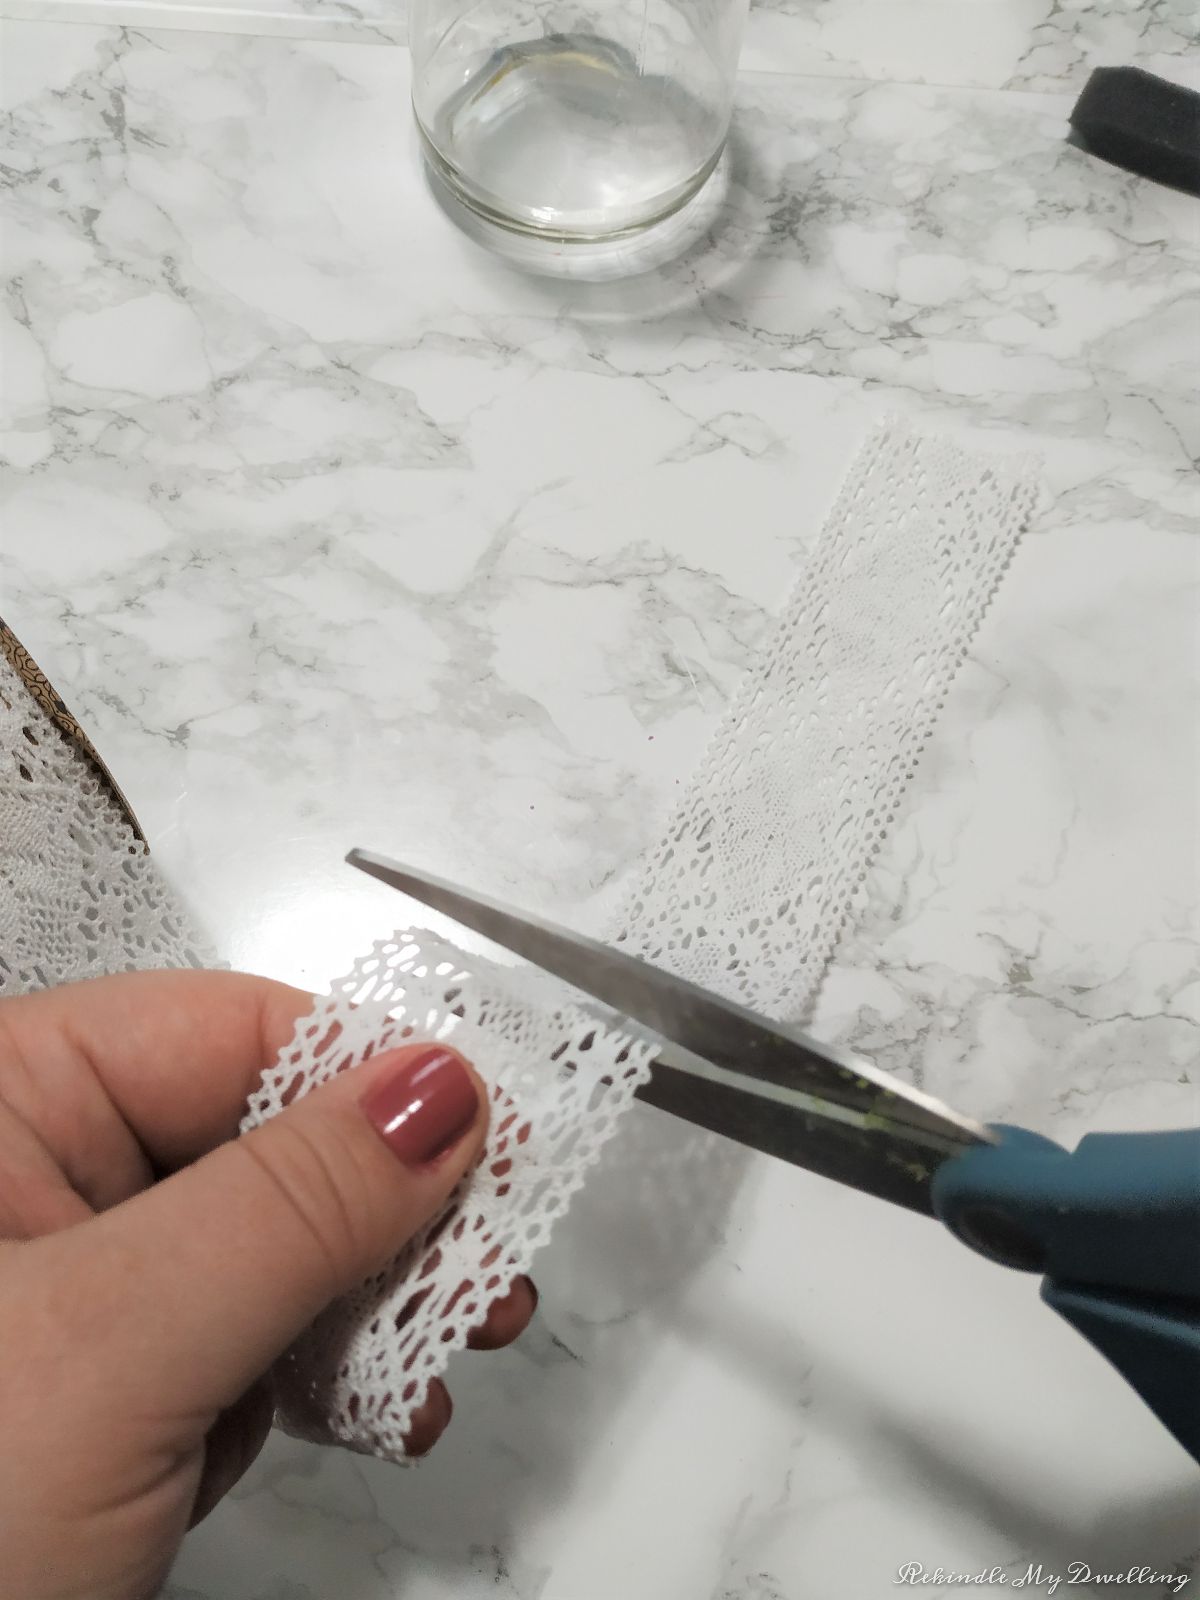 Cutting a piece of lace fabric.